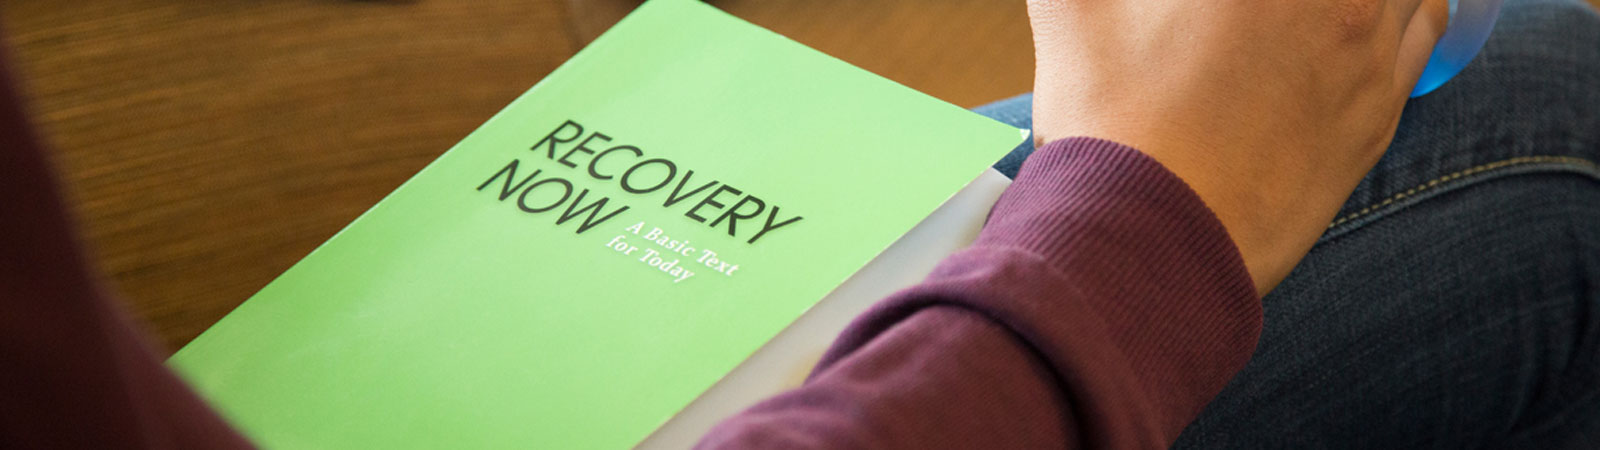 Recovery Now book cover